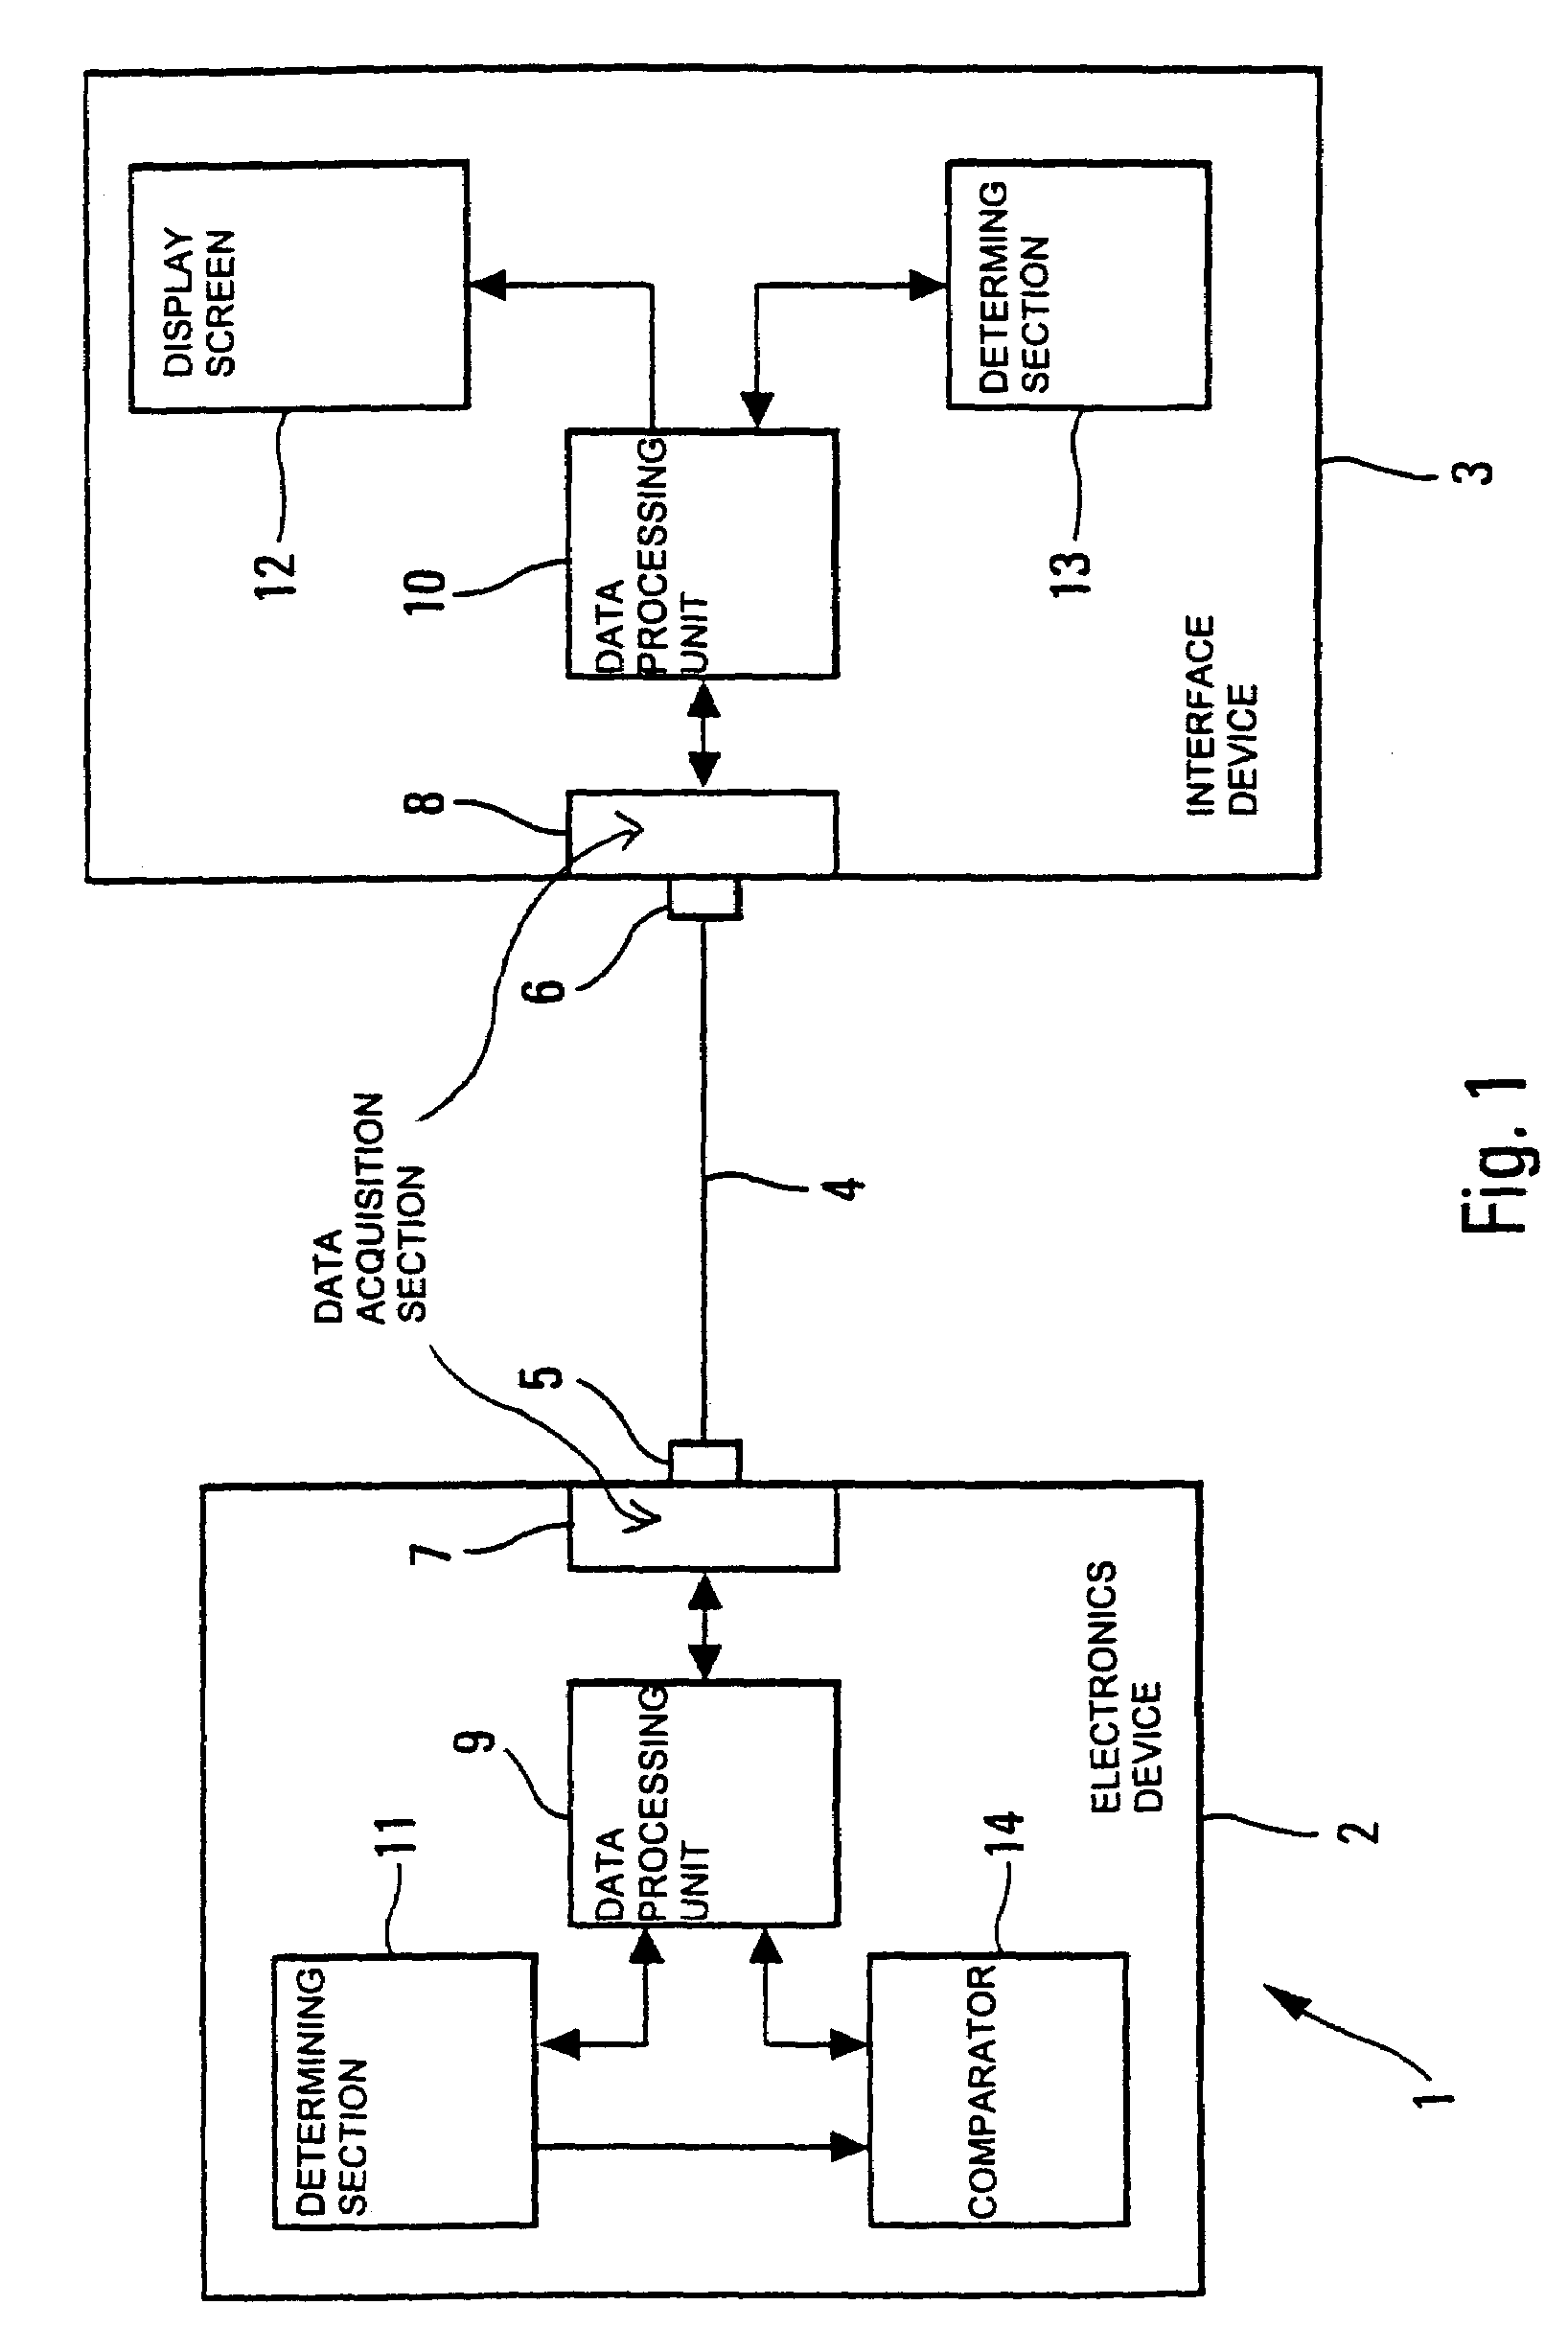 Process and system for transmitting information on an aircraft